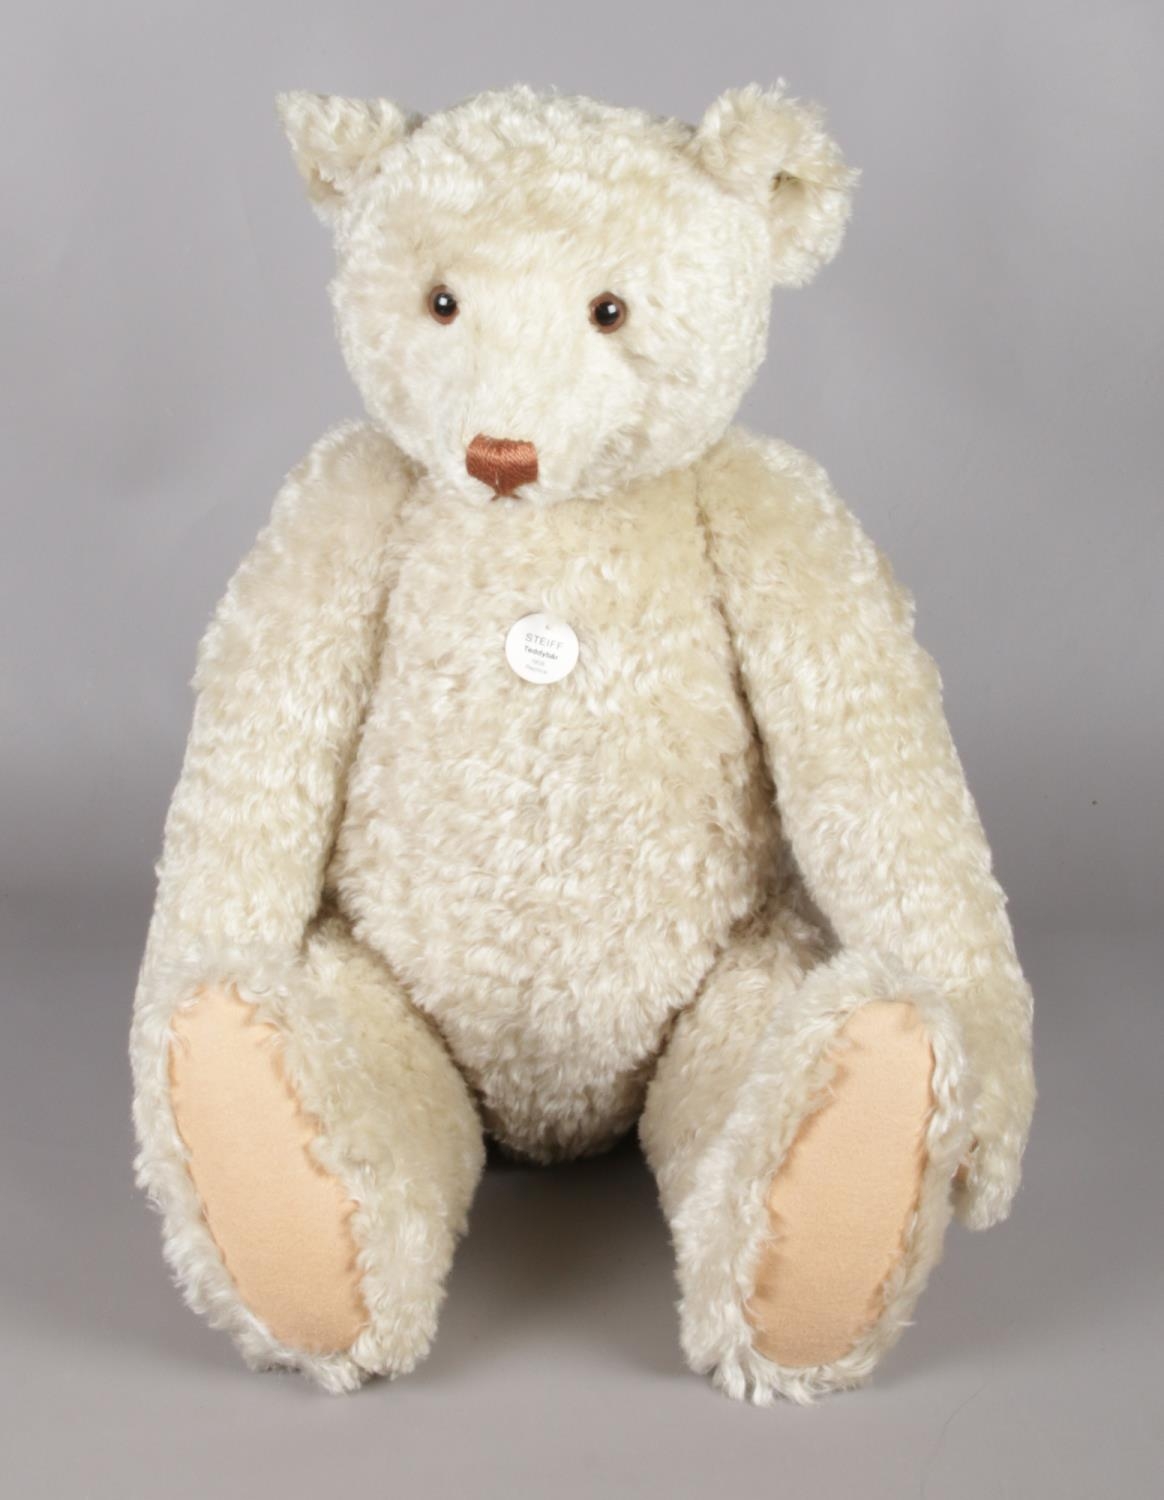 A Steiff limited edition 1994 Replica Teddy Bear 1908 white, 2033 of 7000 worldwide. Gold button - Image 2 of 3